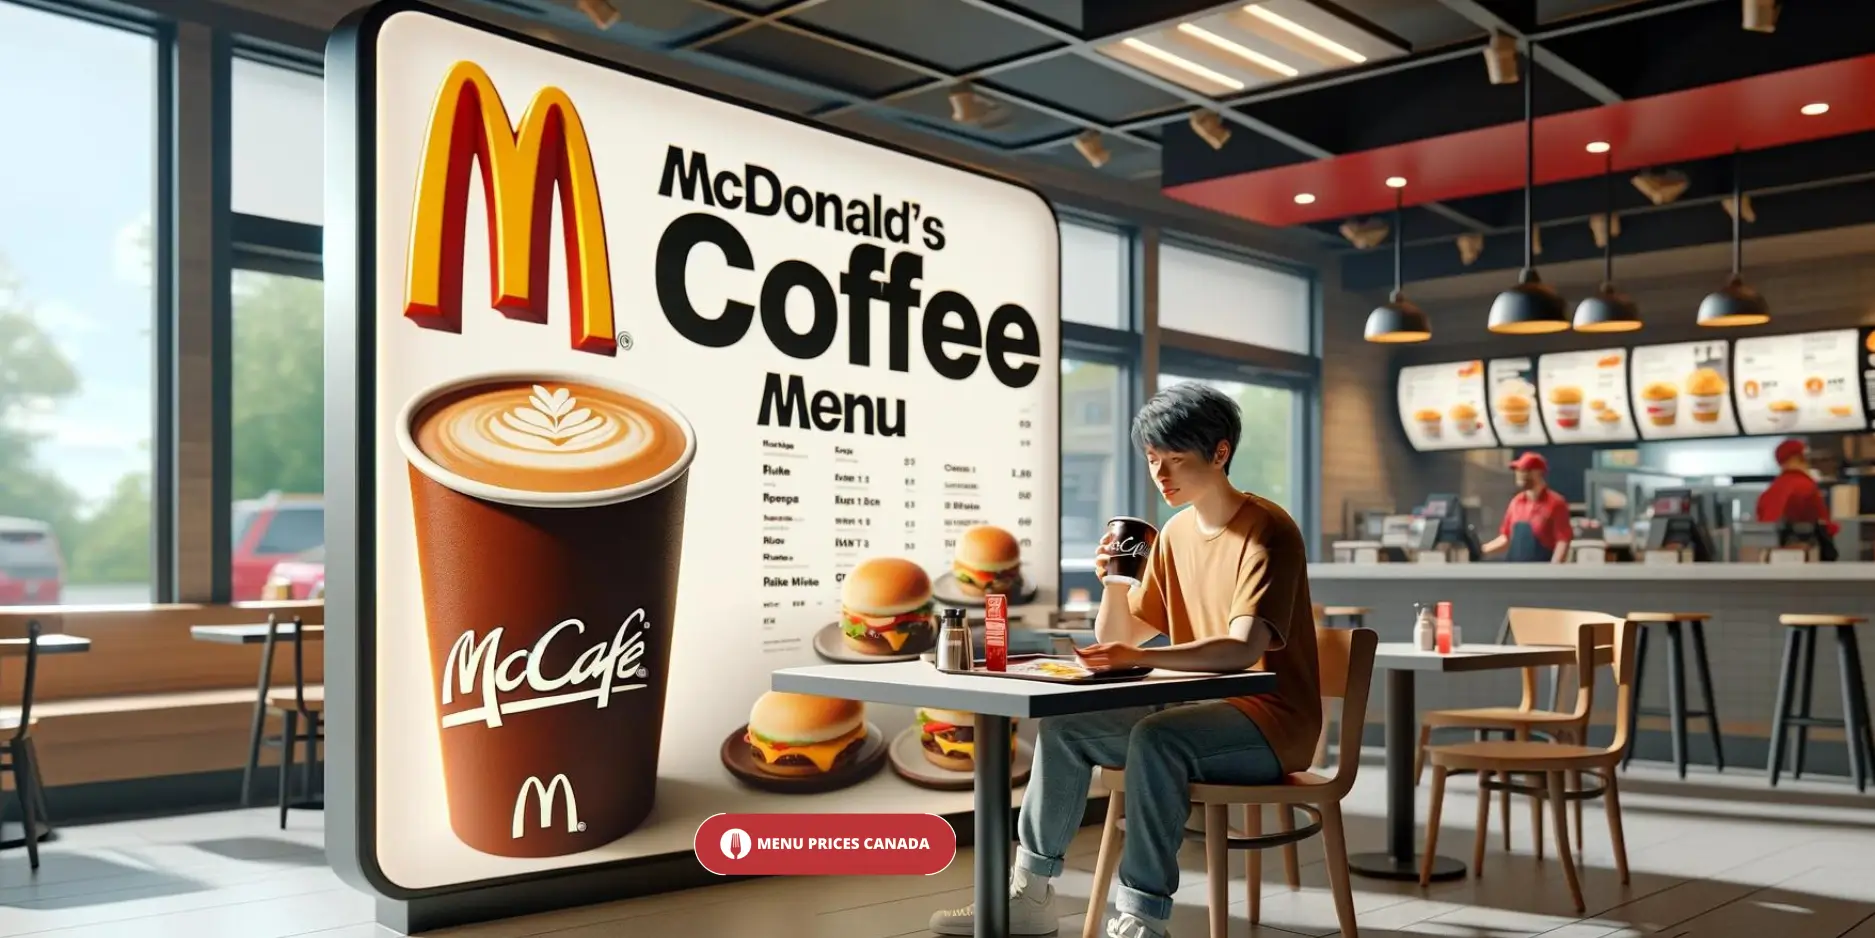 Mcdonald's-Coffee-Menu-with-prices-Canada